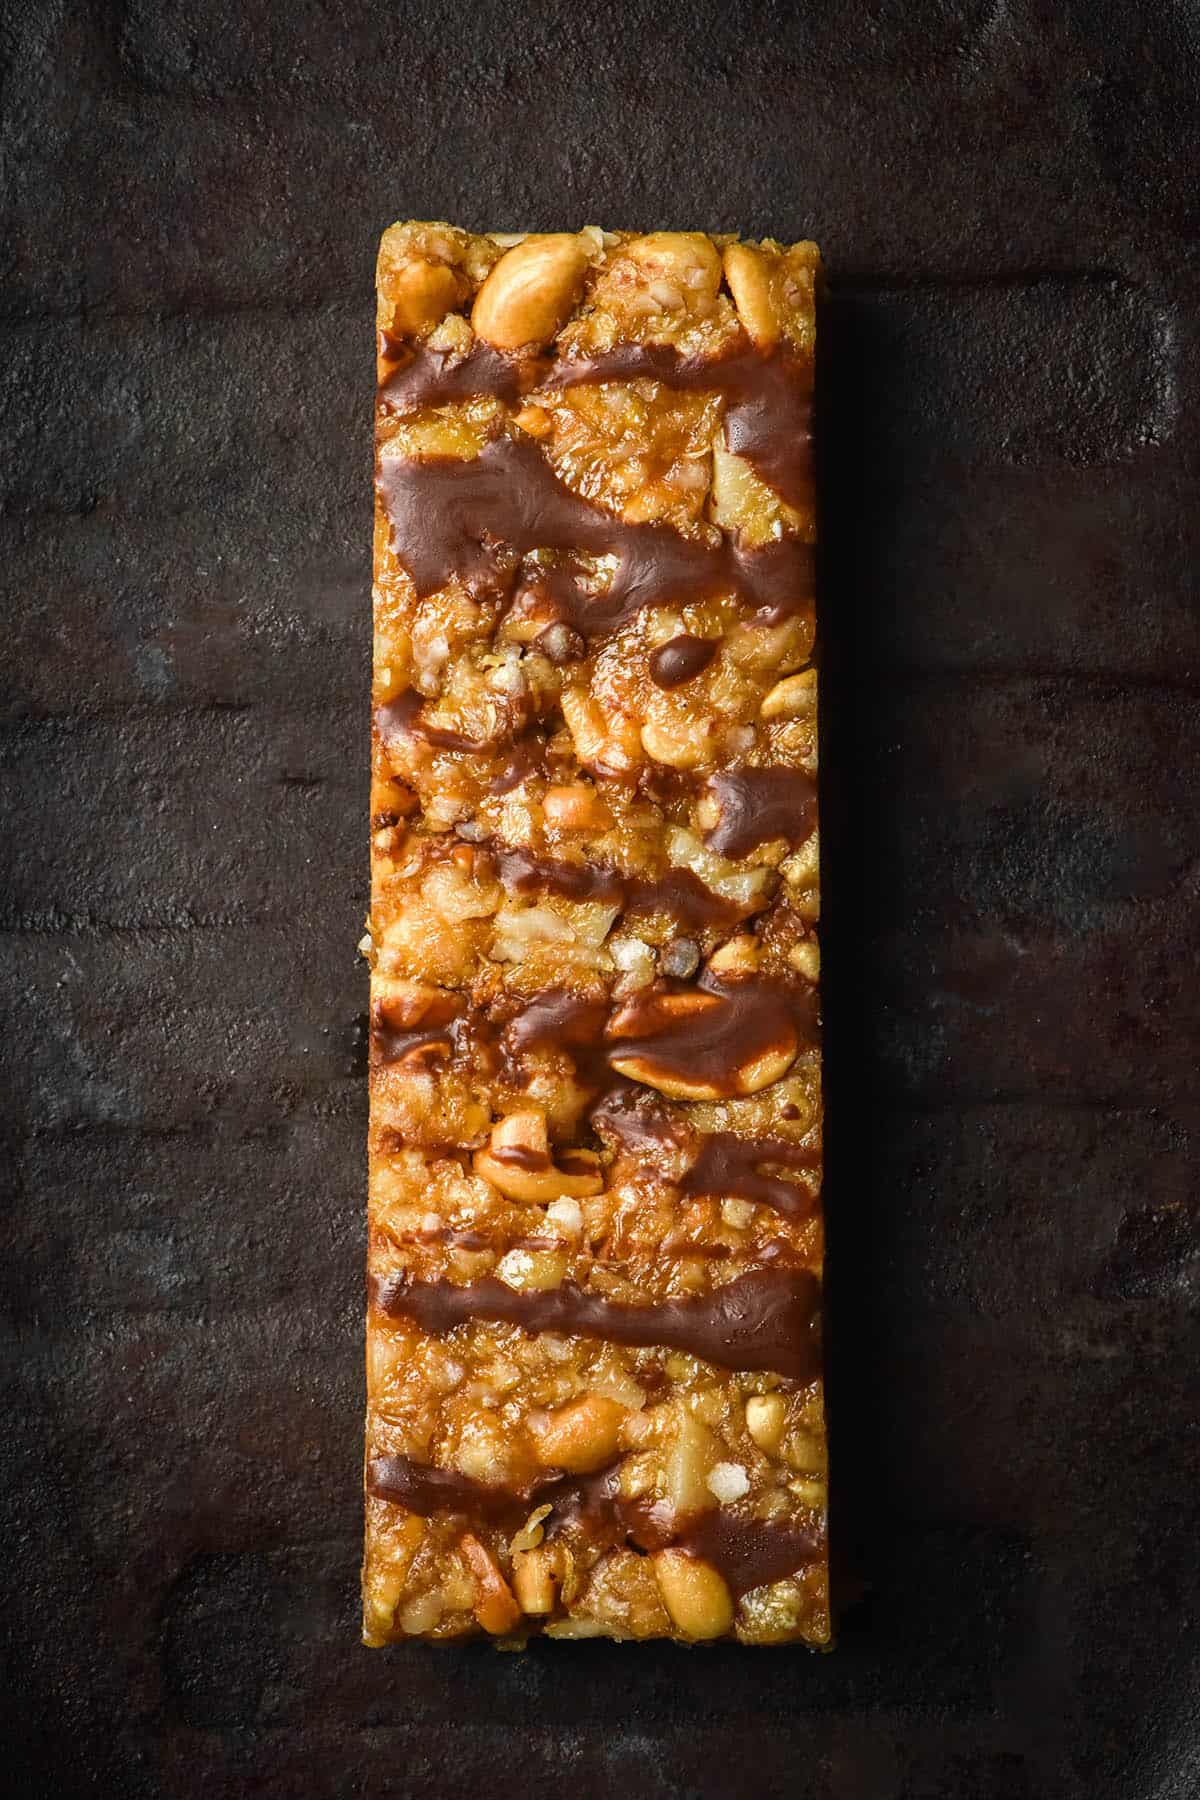 An aerial image of a Low FODMAP granola bar drizzled with chocolate on a dark steel plate